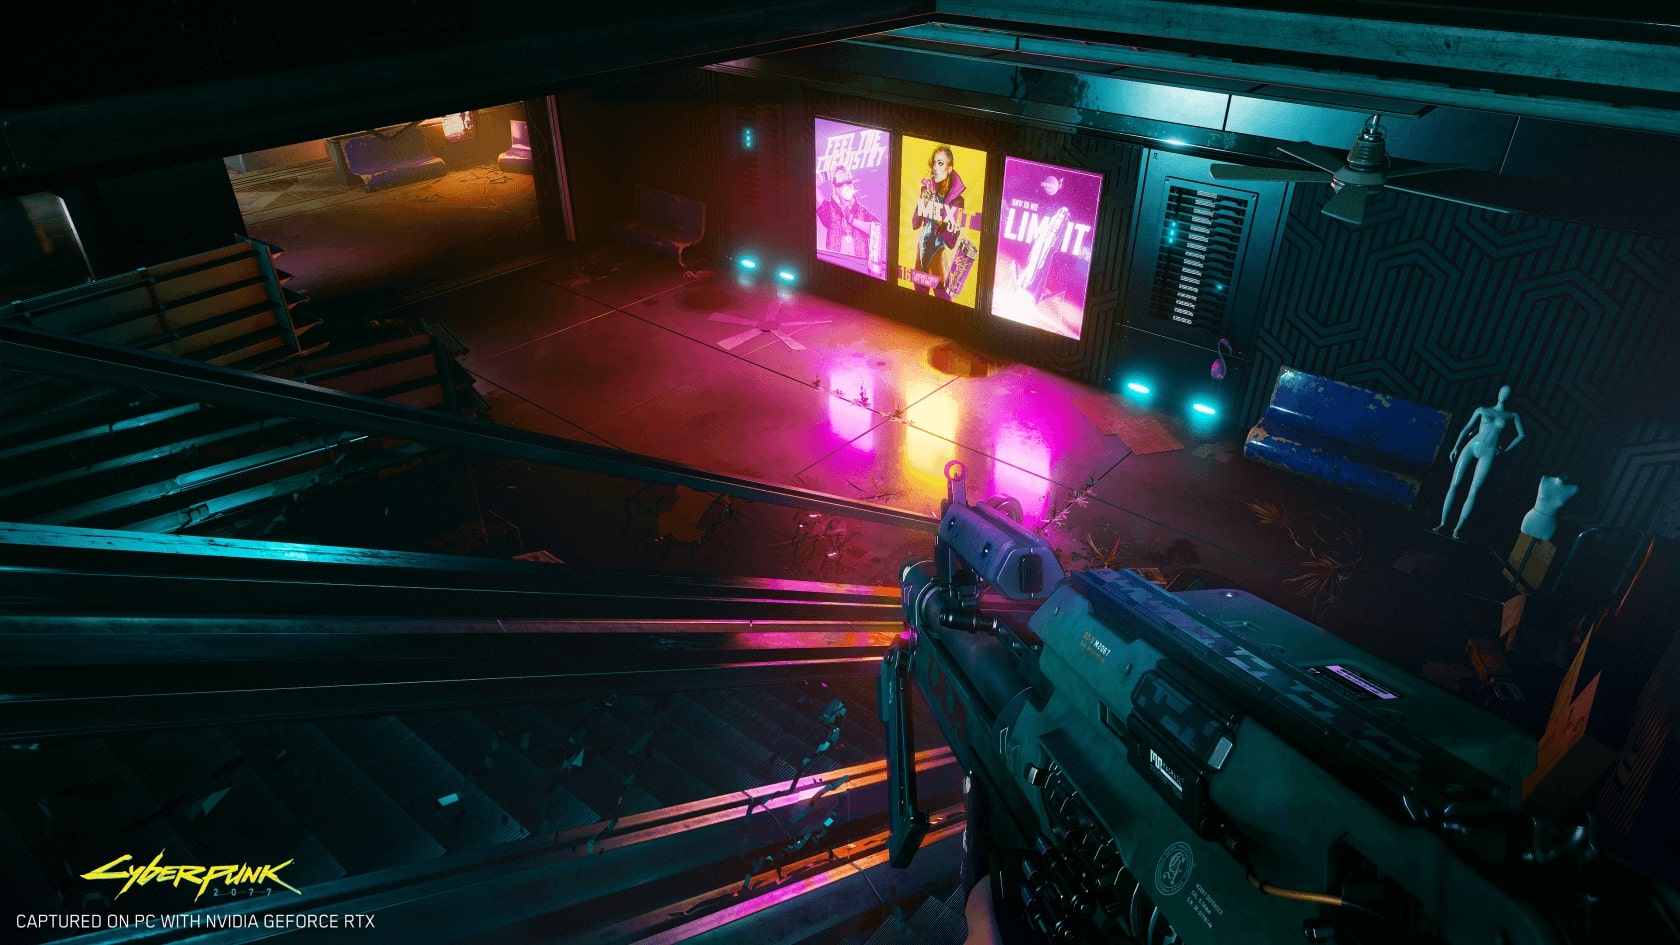 NPCs won't refer to you by gender in Cyberpunk 2077